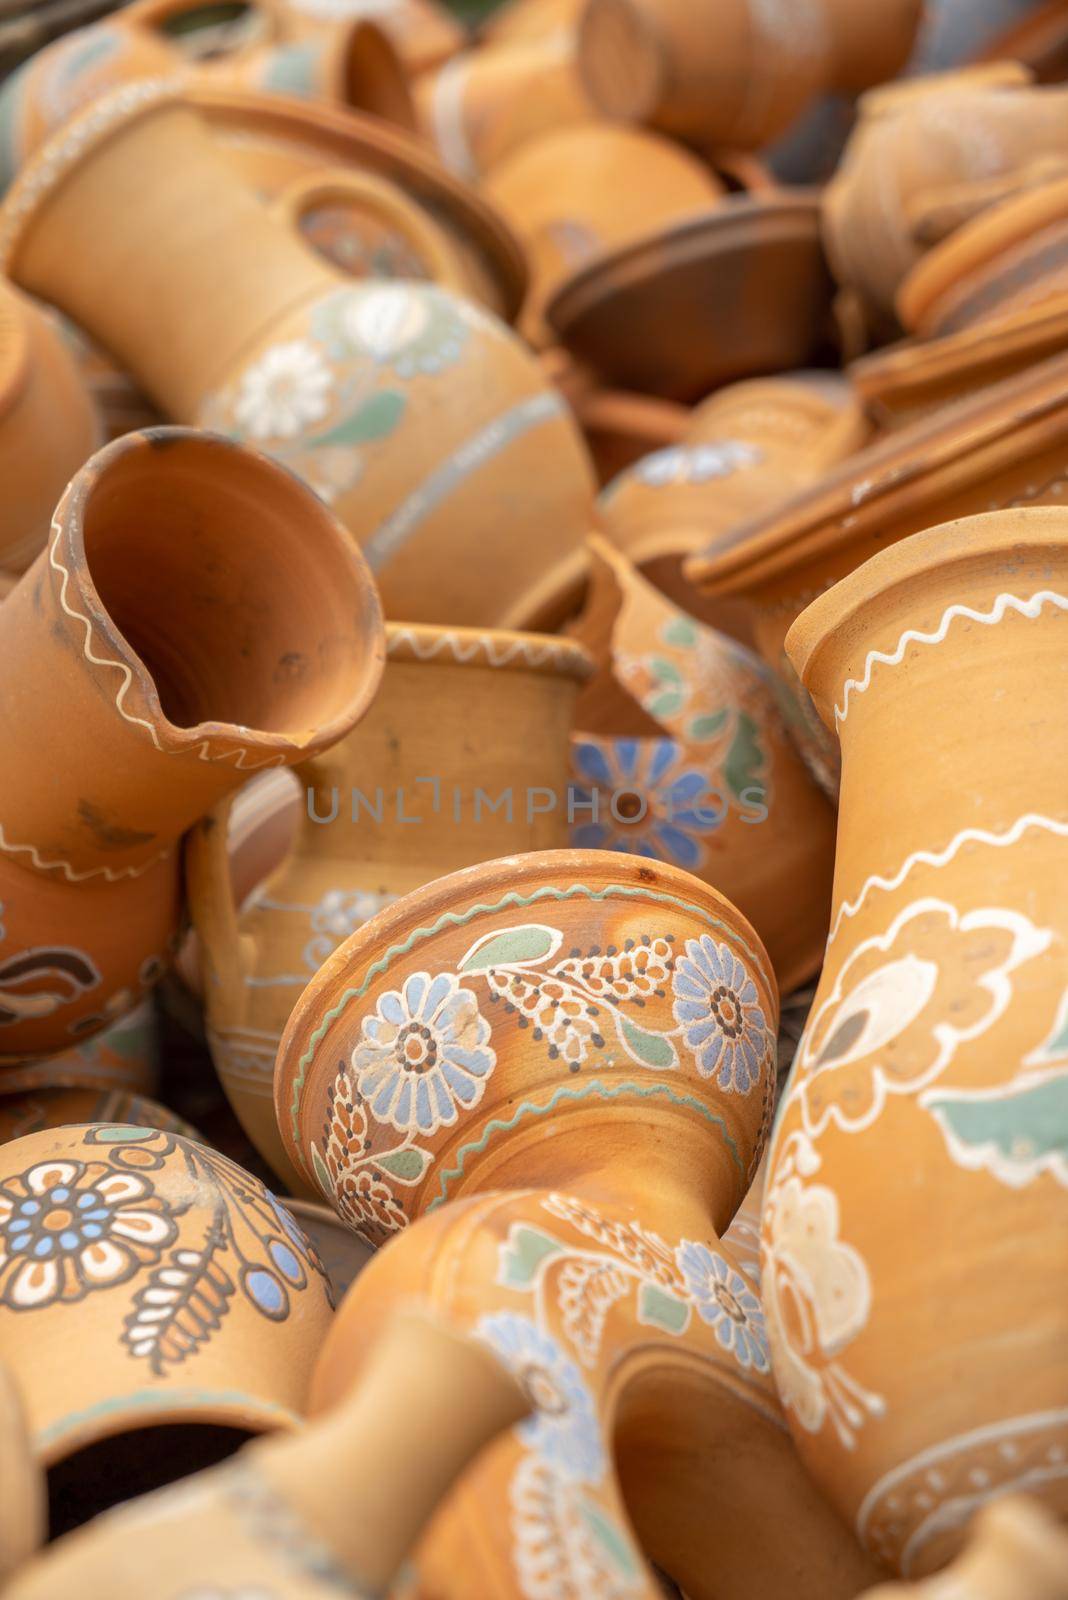 Traditional Ukrainian pottery with patterns and ornament. Ukrainian culture